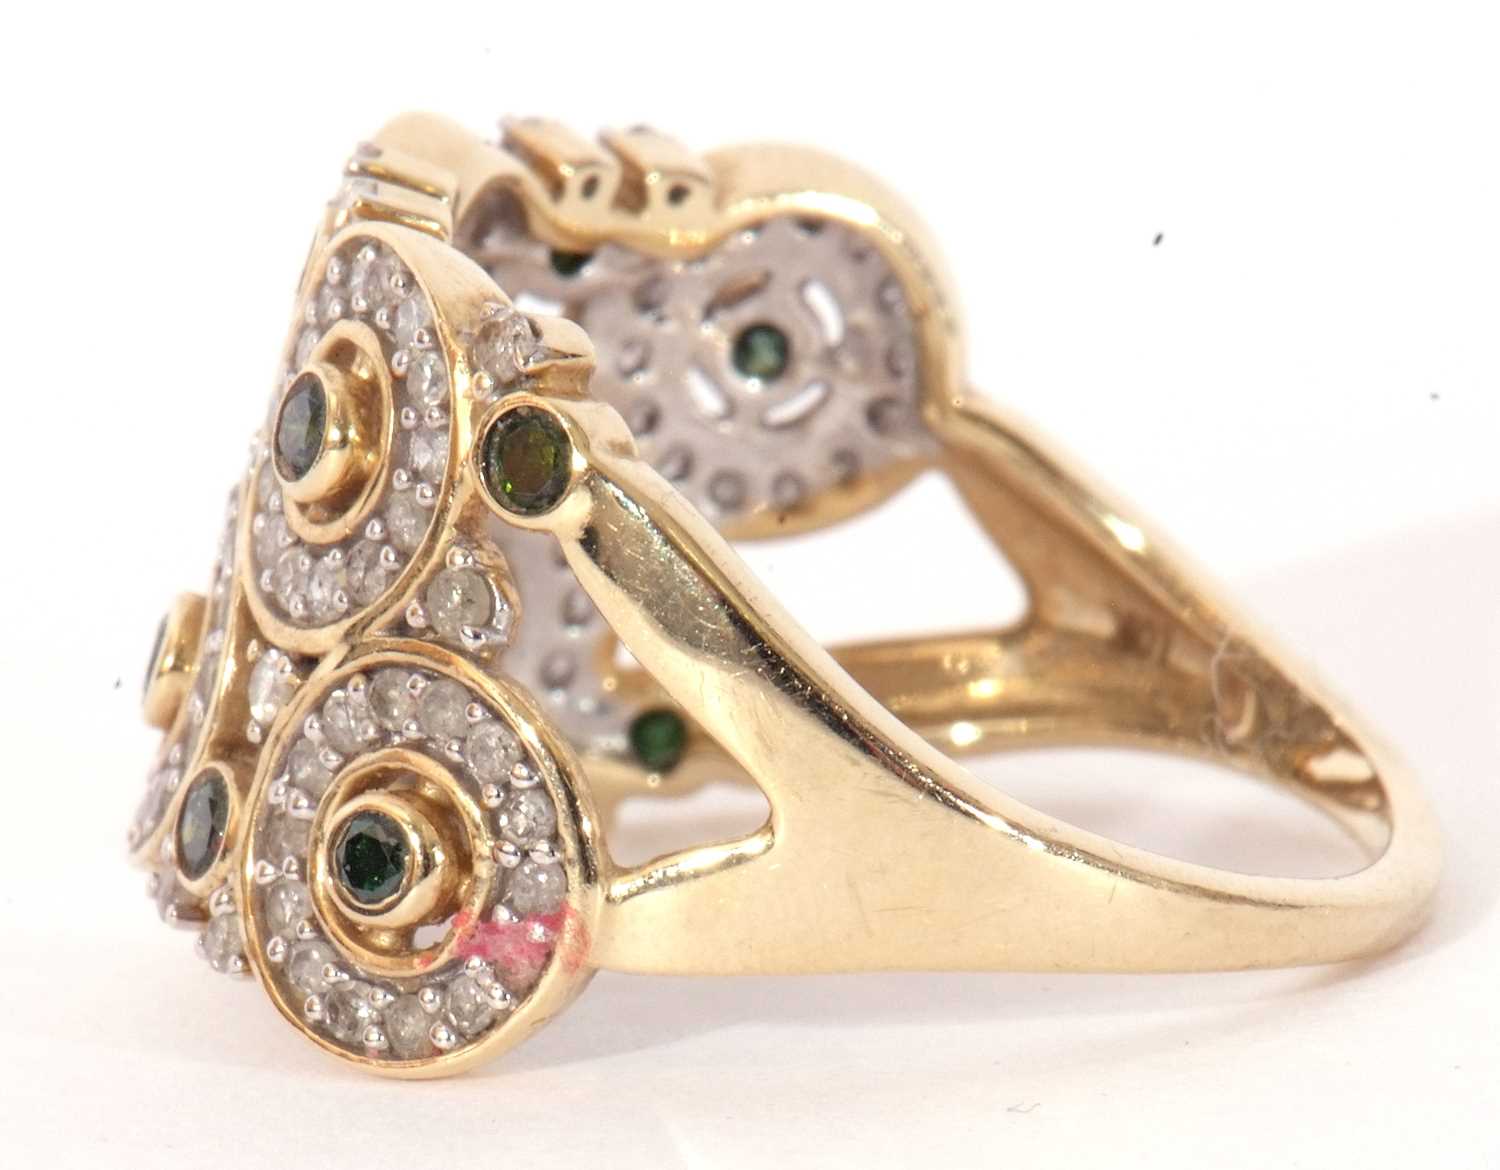 Modern 9ct gold, diamond and green stone set ring, a design featuring six small diamond set discs - Image 3 of 10